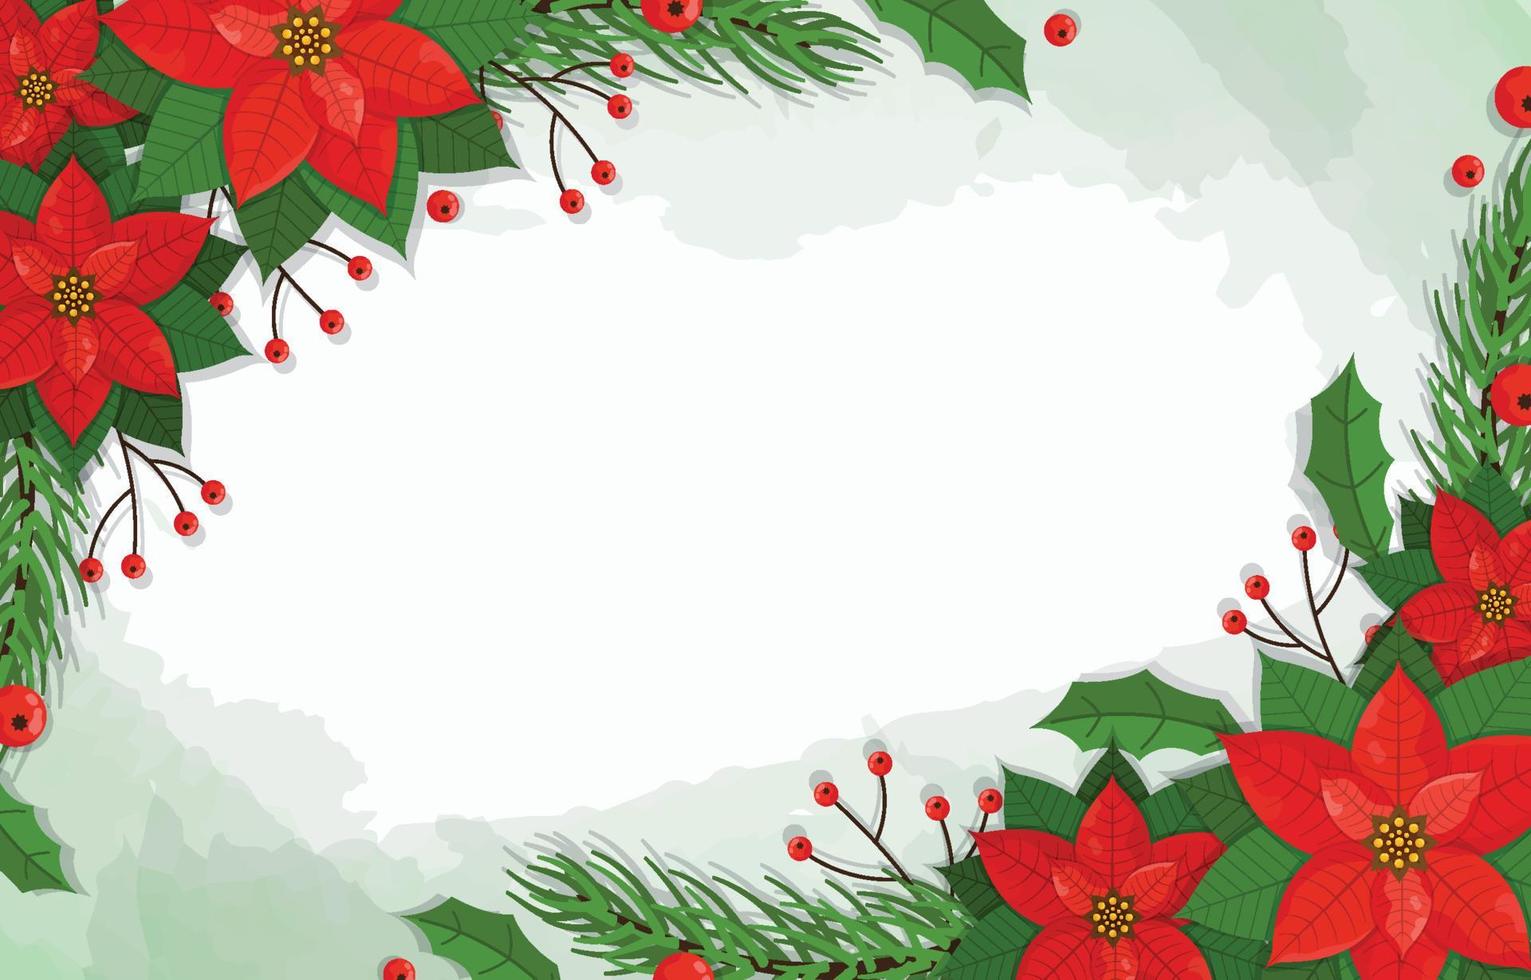 Christmas Poinsettia Floral Ornament Background vector